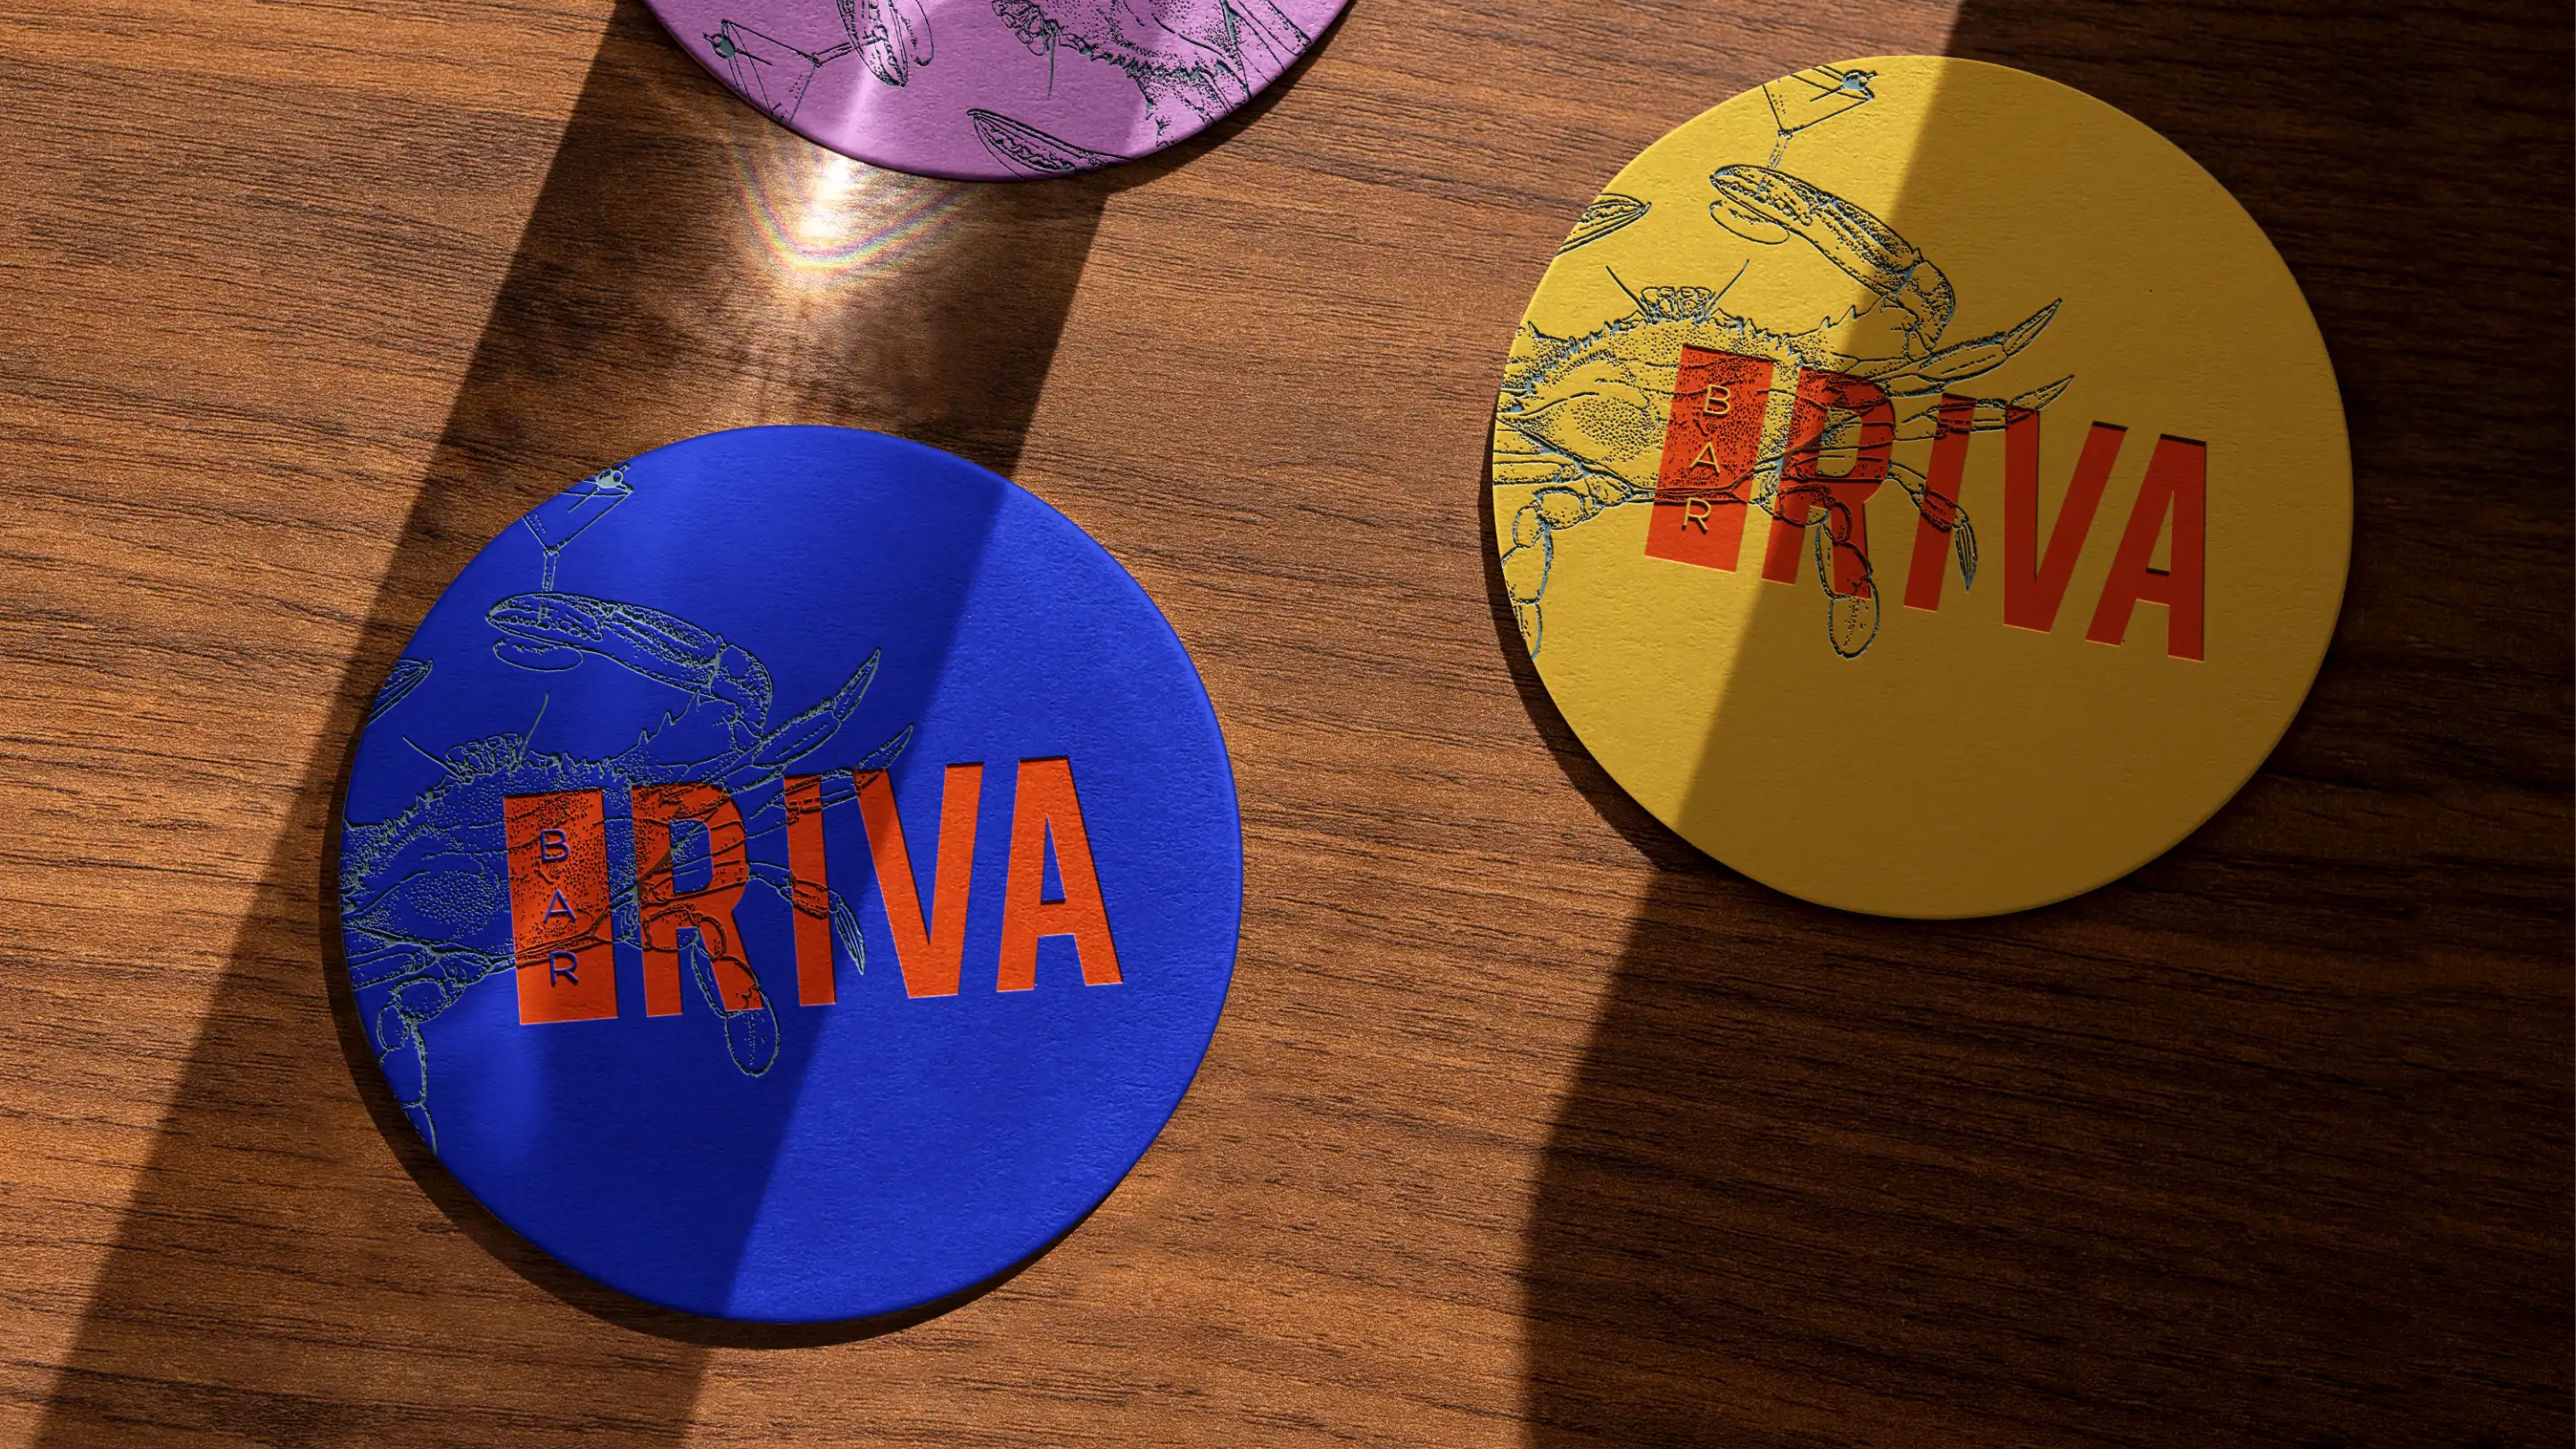 Bar Riva crab logo on thick paper coasters on bar.